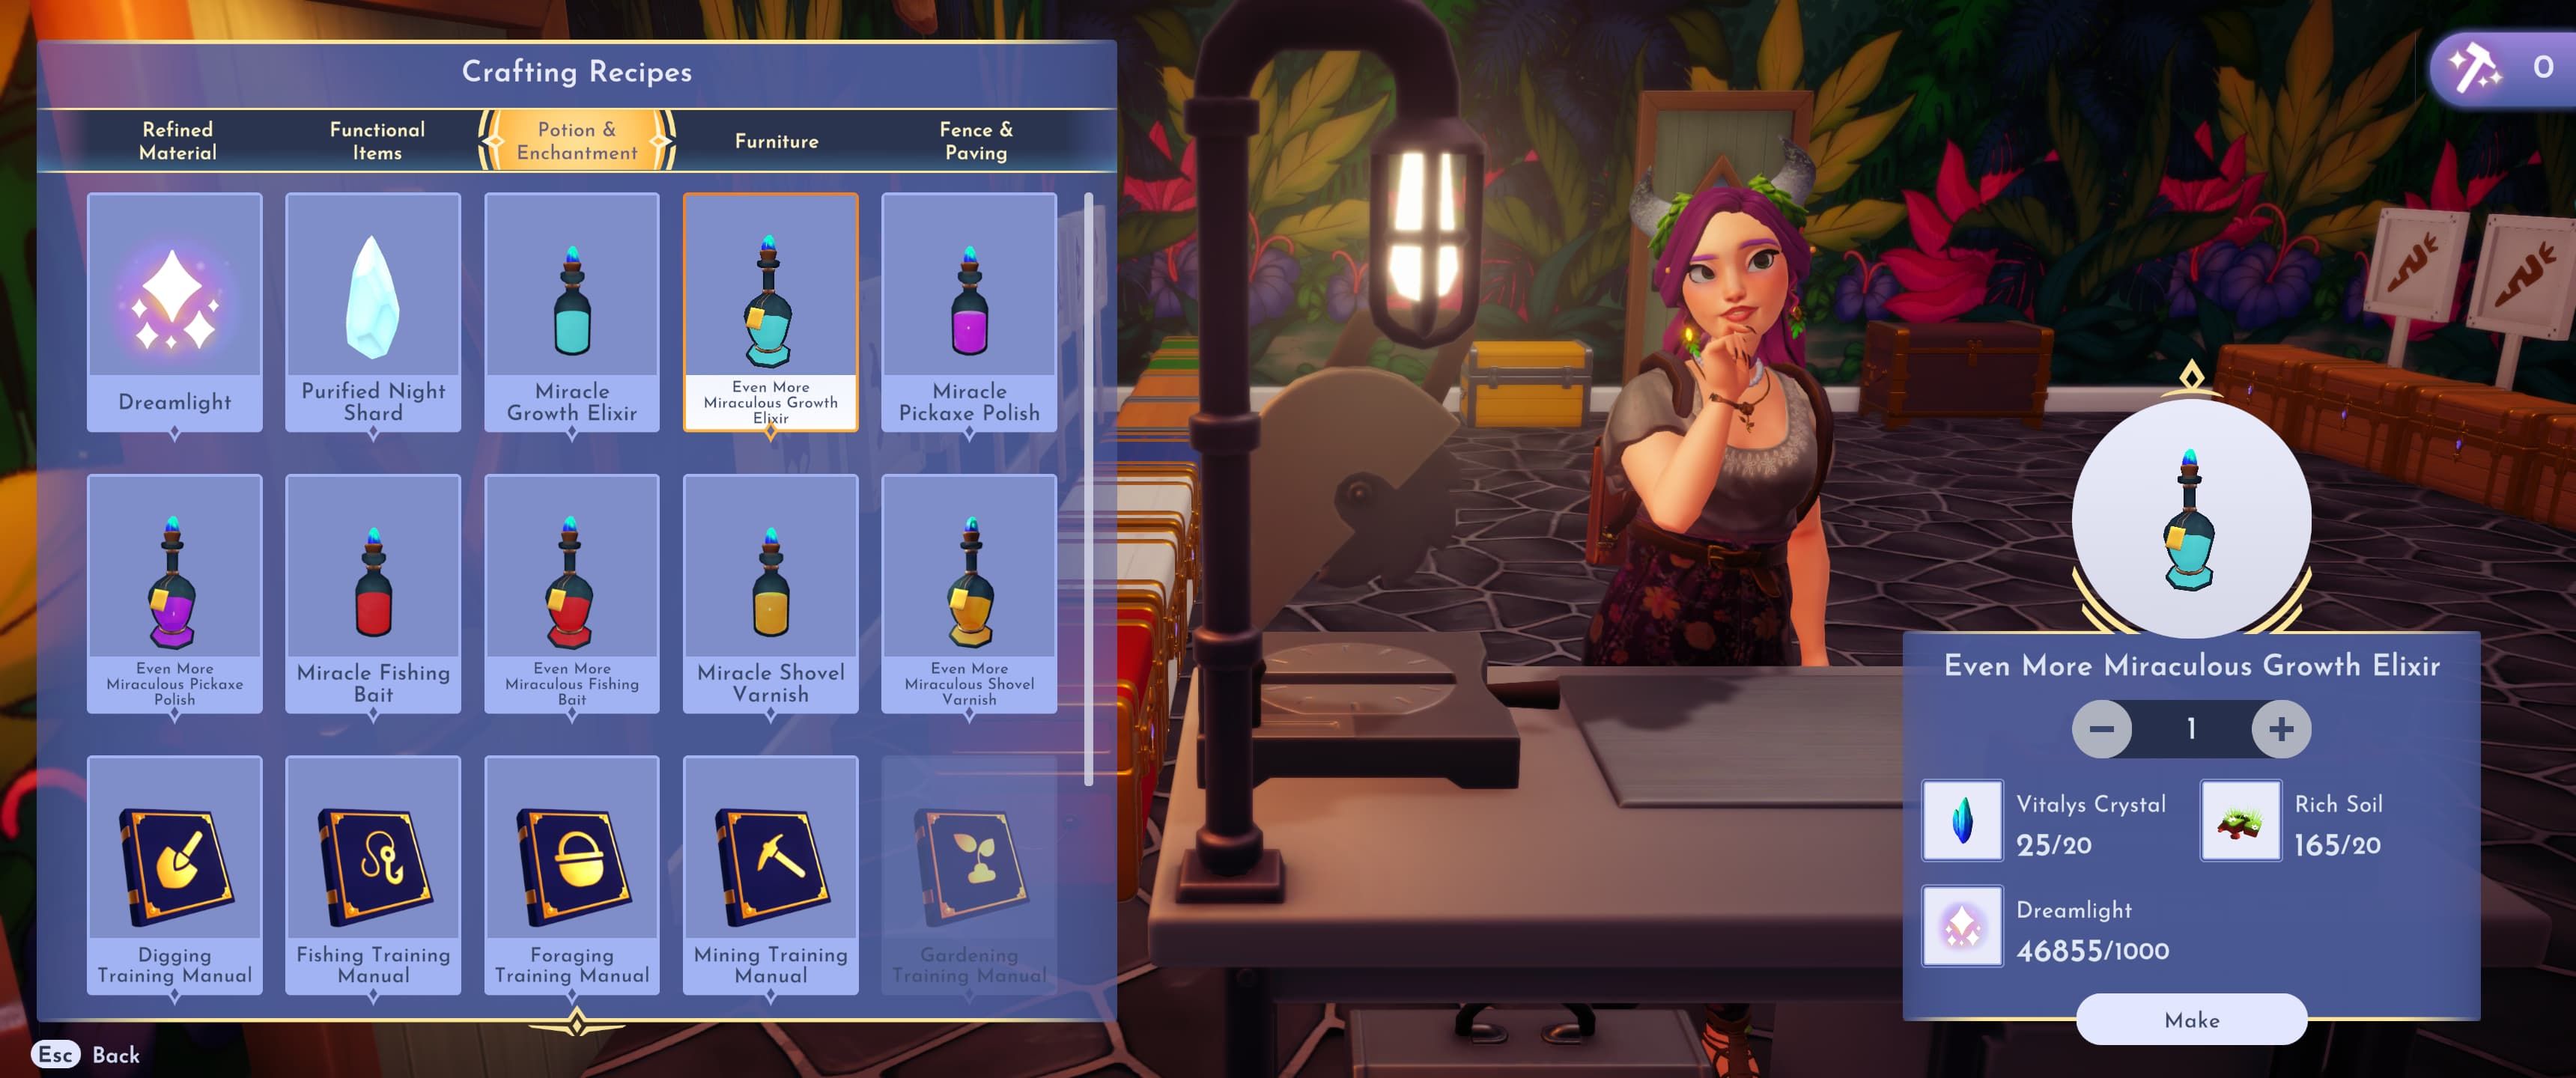 Crafting Even More Miraculous Growth Elixir in Disney Dreamlight Valley